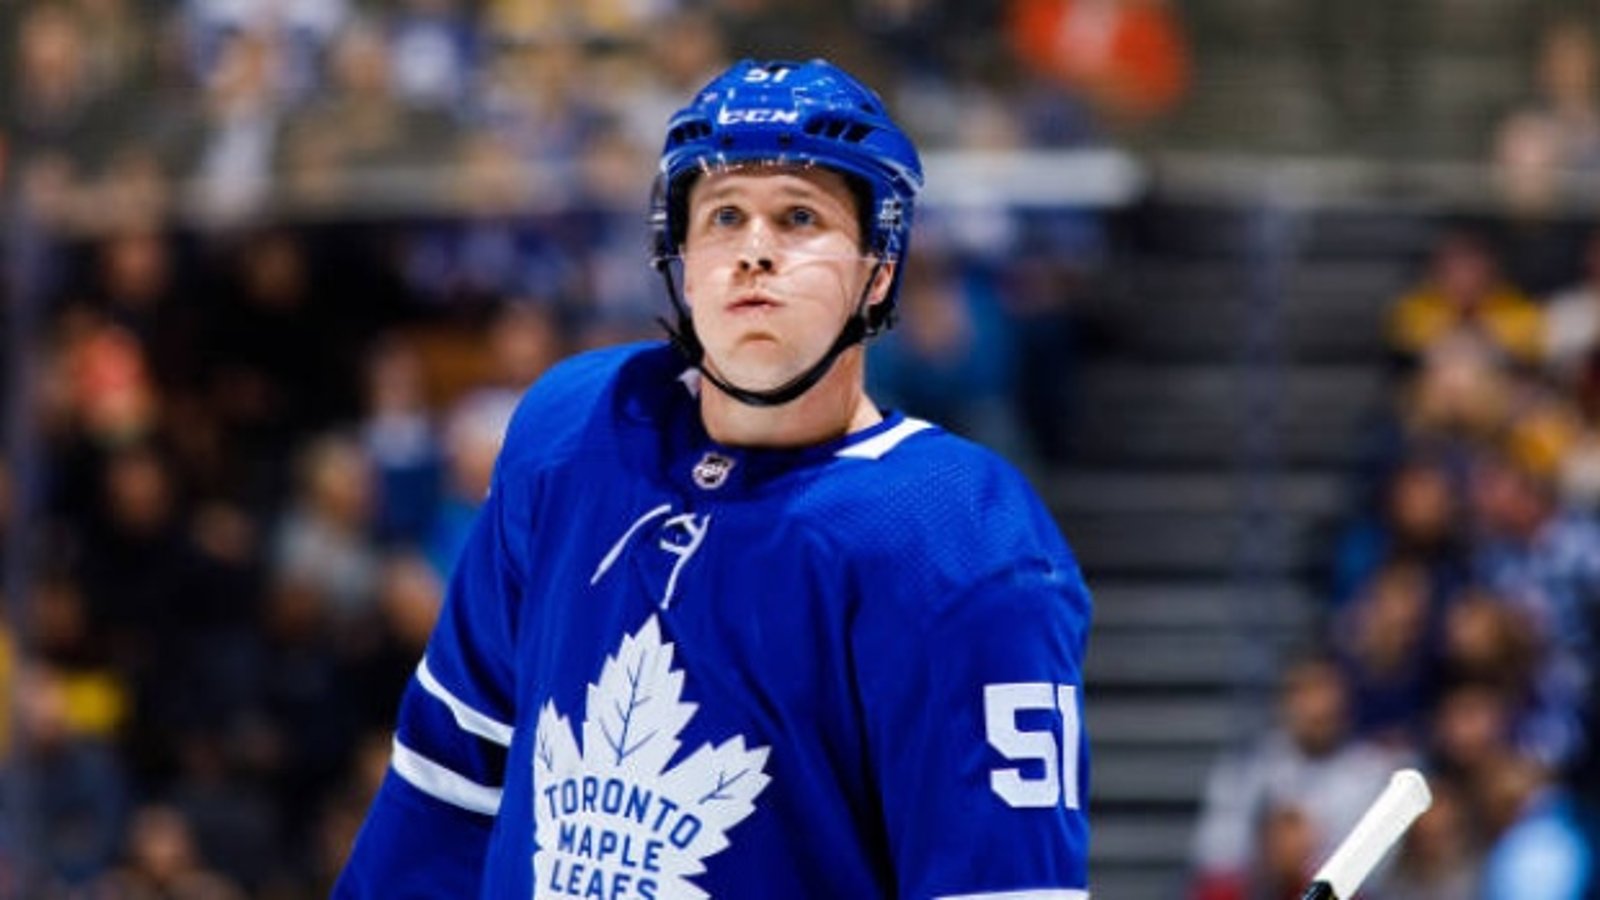 Leafs to trade Gardiner following the targeted boos by the home crowd?!